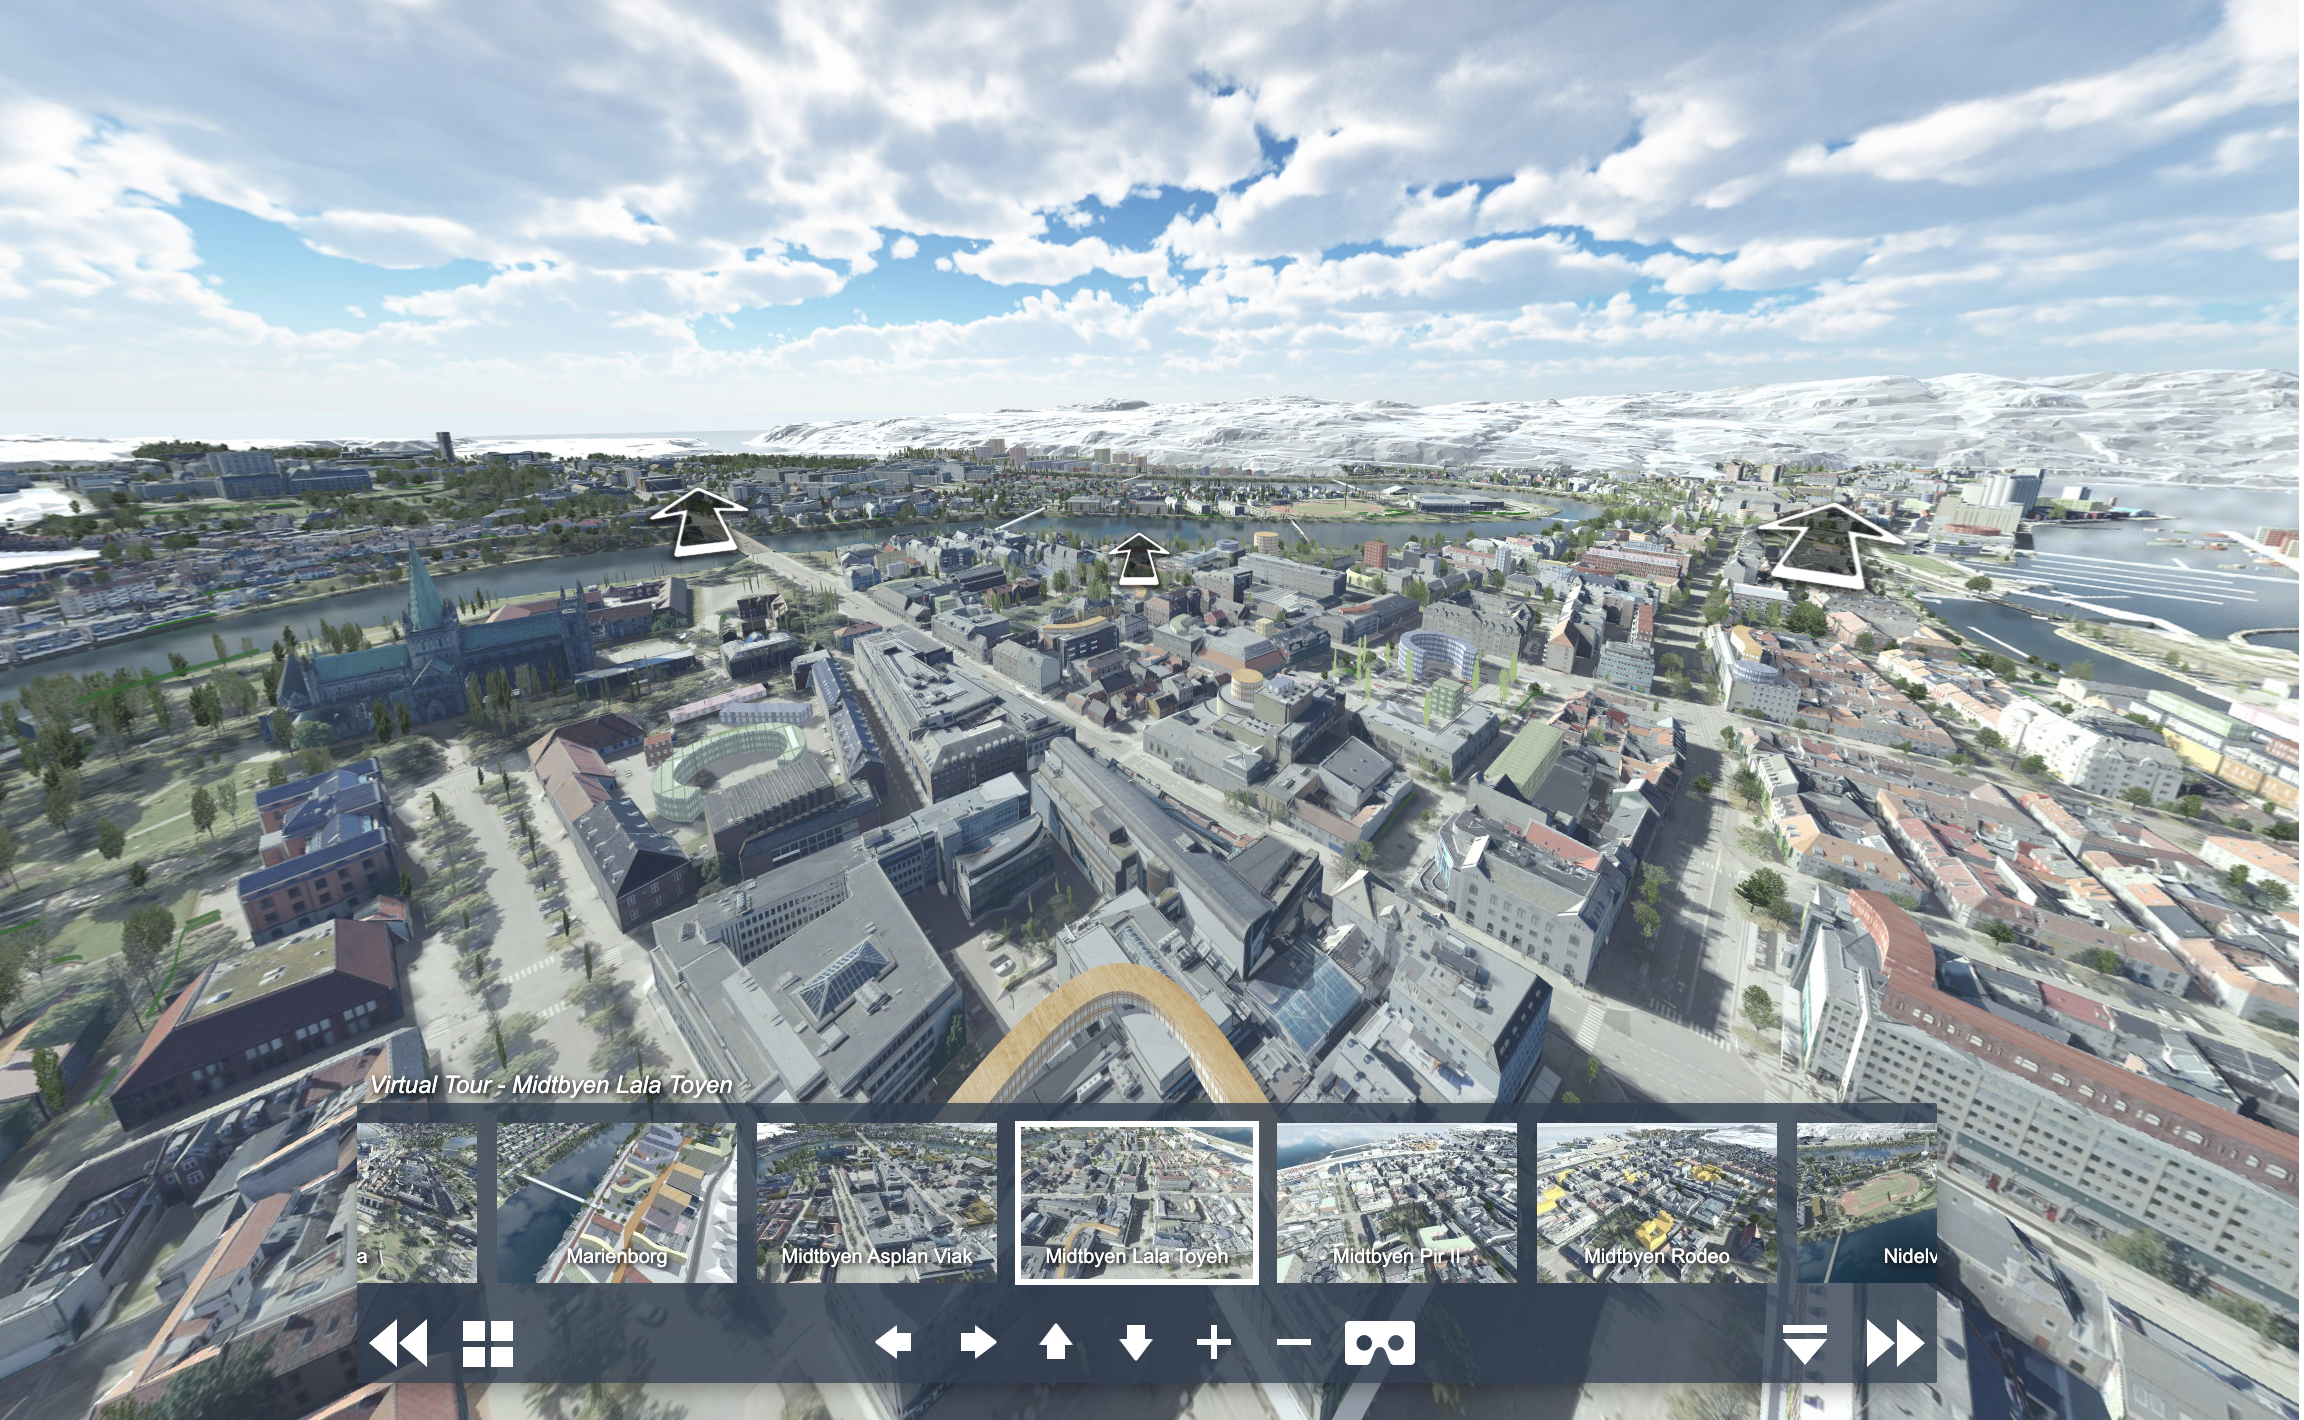 Capture from the digital twin created of Trondheim, Norway